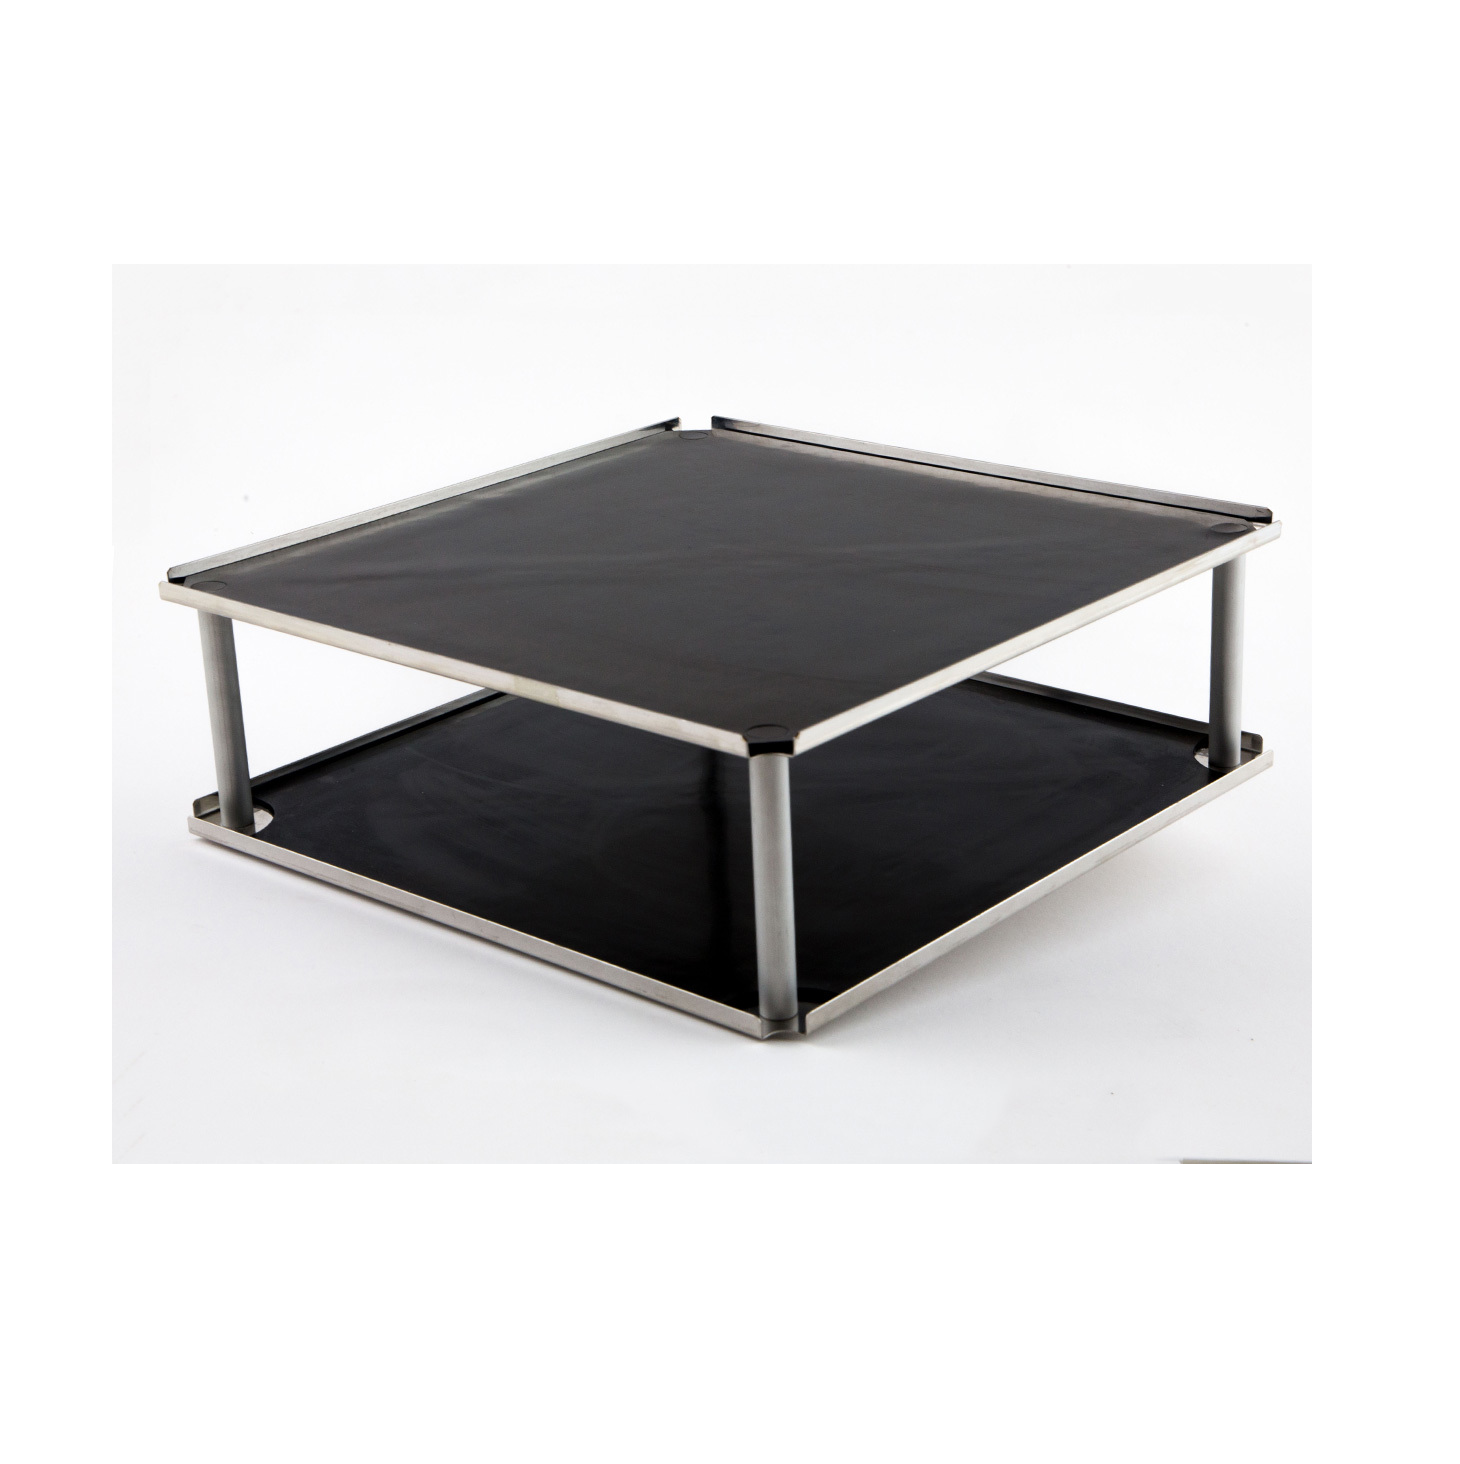 Corning™ Double Flat Platform with Non-slip Rubber Mat, 300 x 300 mm